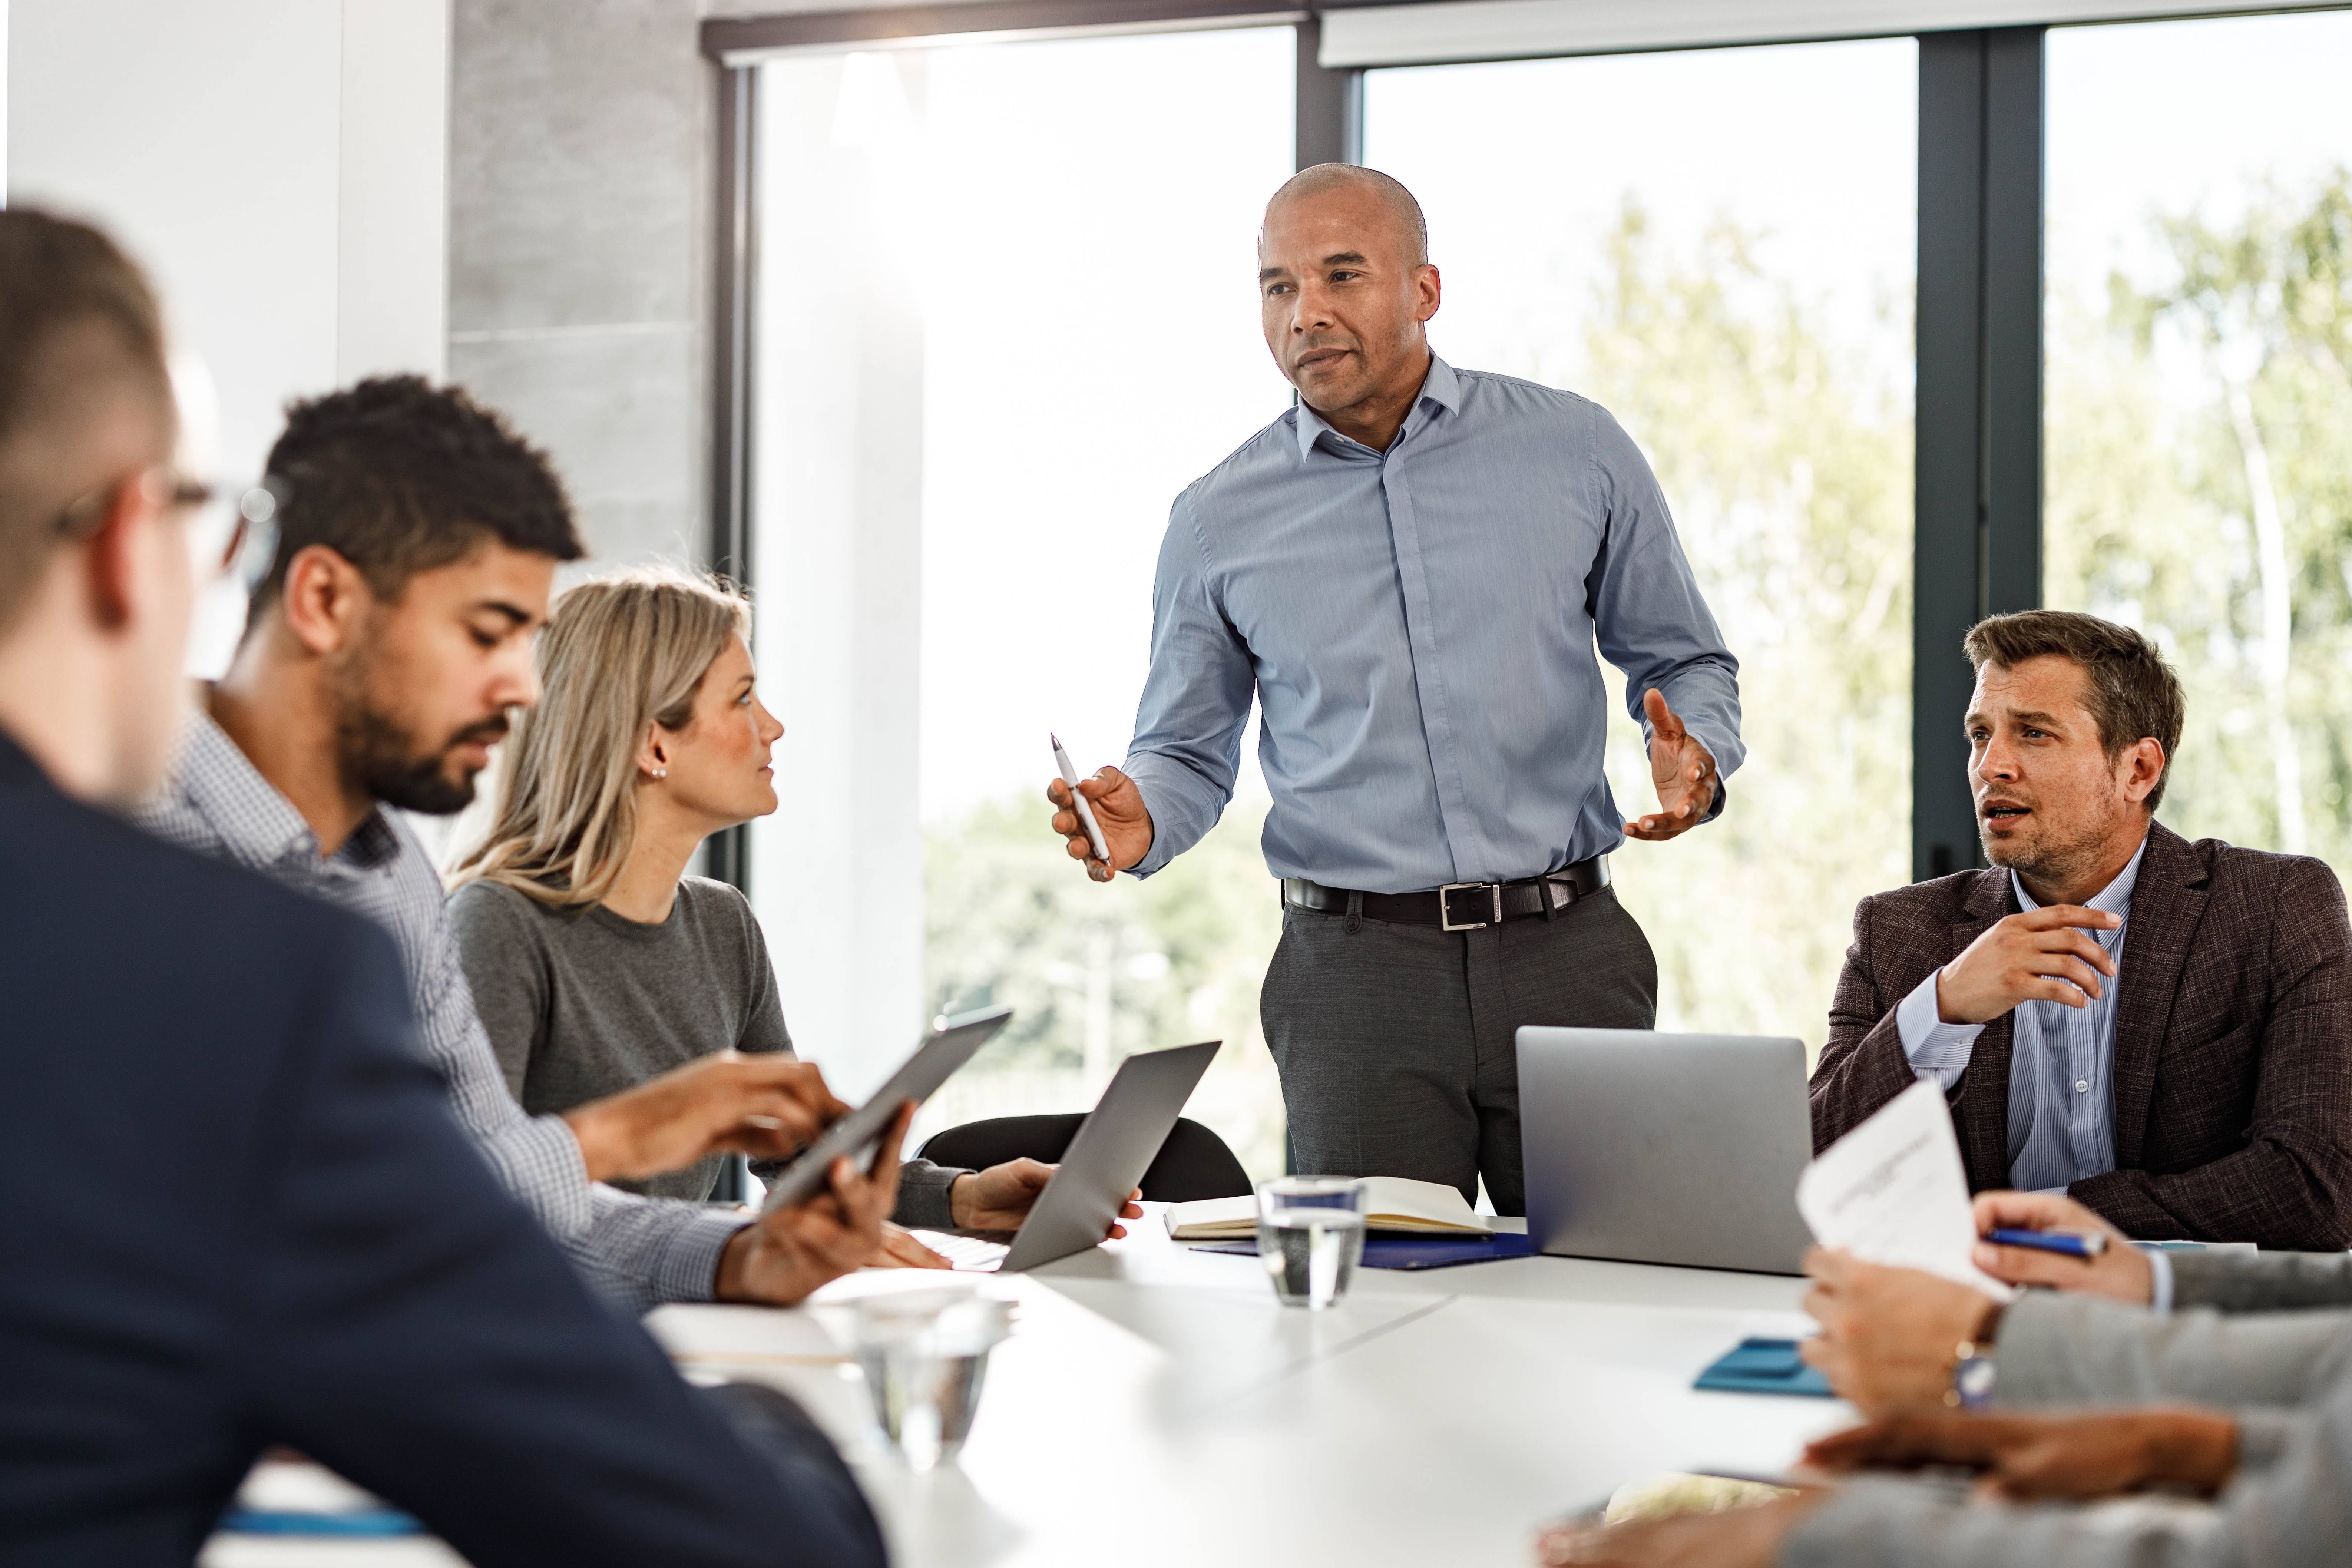 How to Make Your Organization’s Board More Diverse